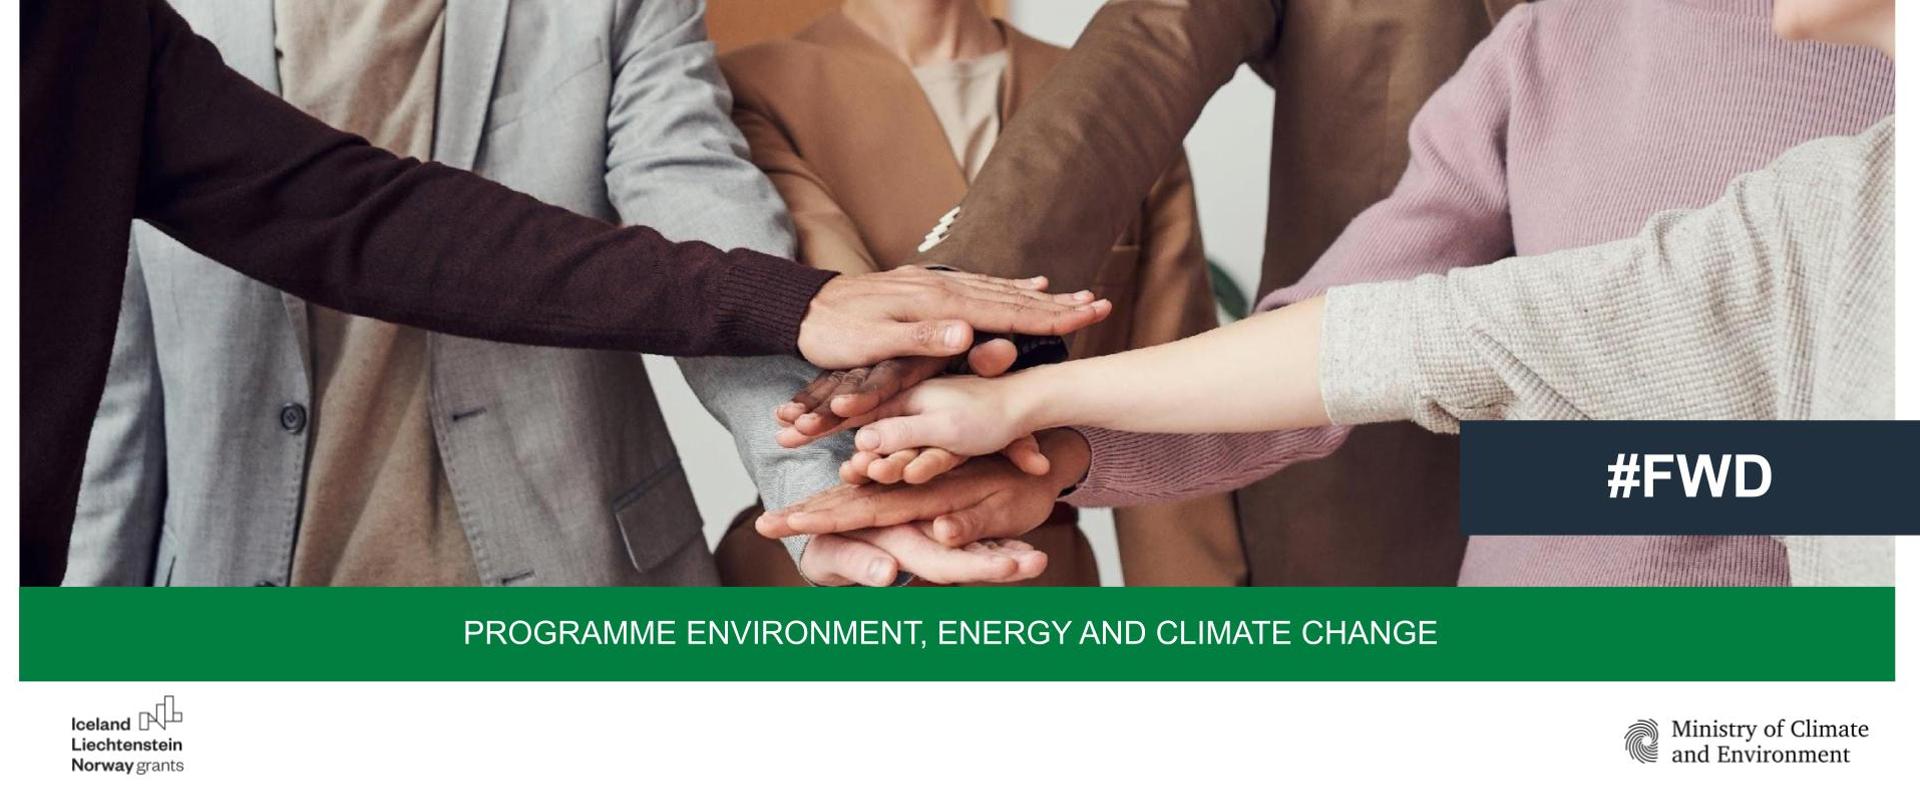 Environment Energy and Climate Change Programme - #bilateralprojects